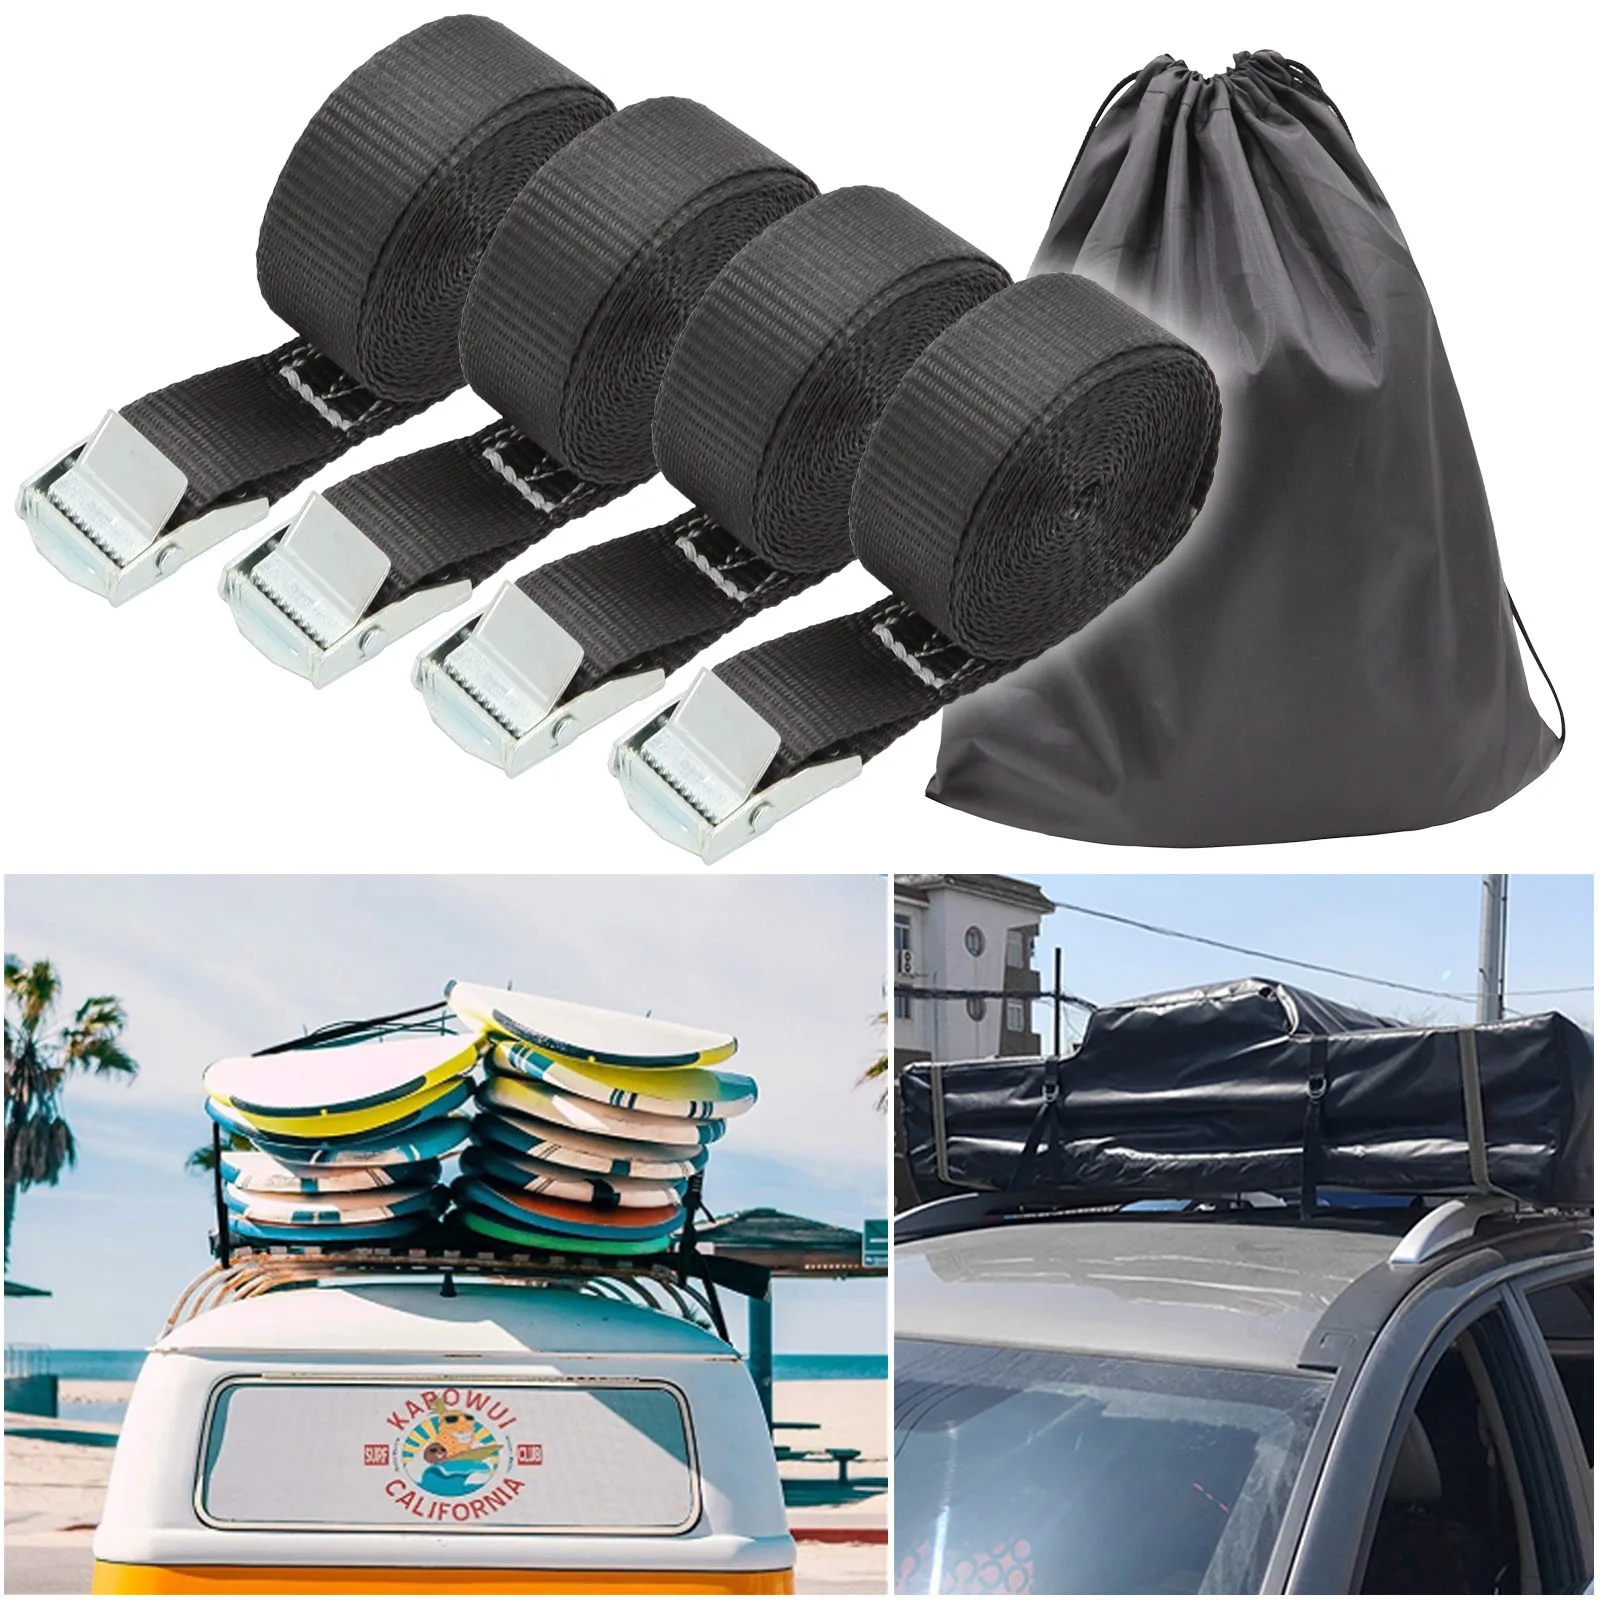 

Lashing Buckle Tie-Down Cargo Straps Hook and Loop Fastener Ratchet Belt Luggage Holder for Car Motorcycle Bike Camping Bags